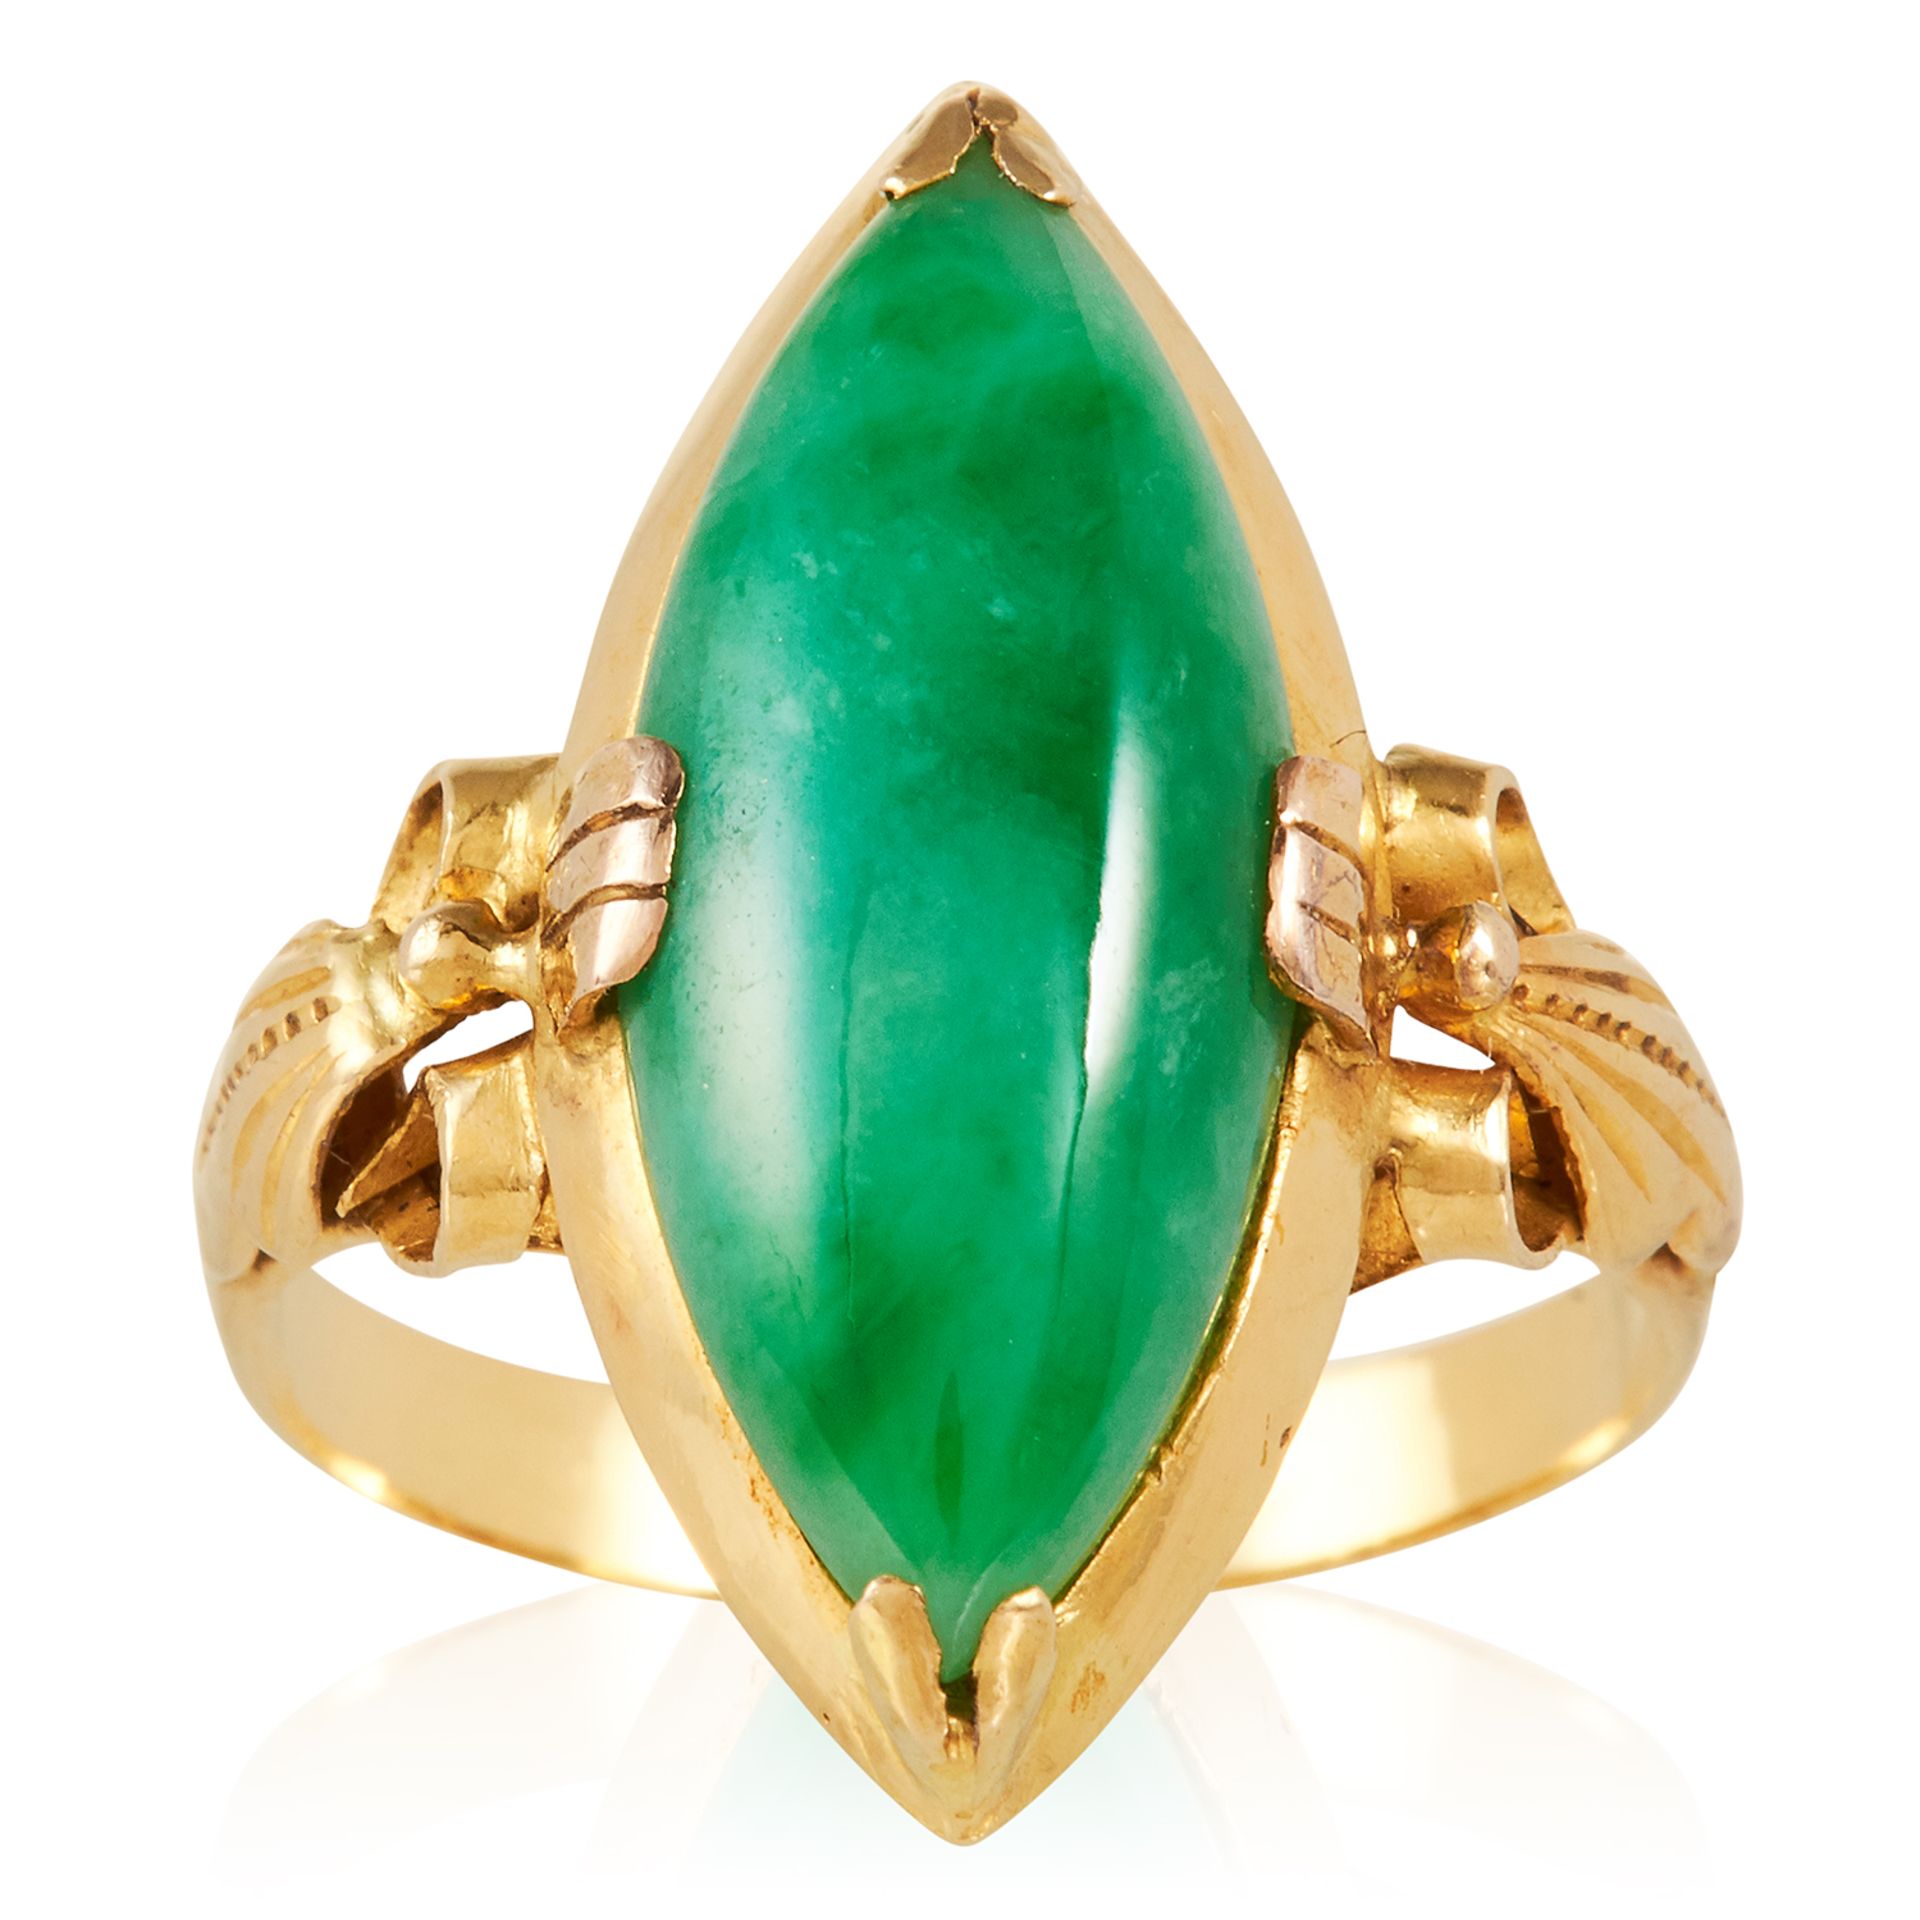 A JADEITE JADE DRESS RING in high carat yellow gold, set with a marquise shaped jade cabochon,